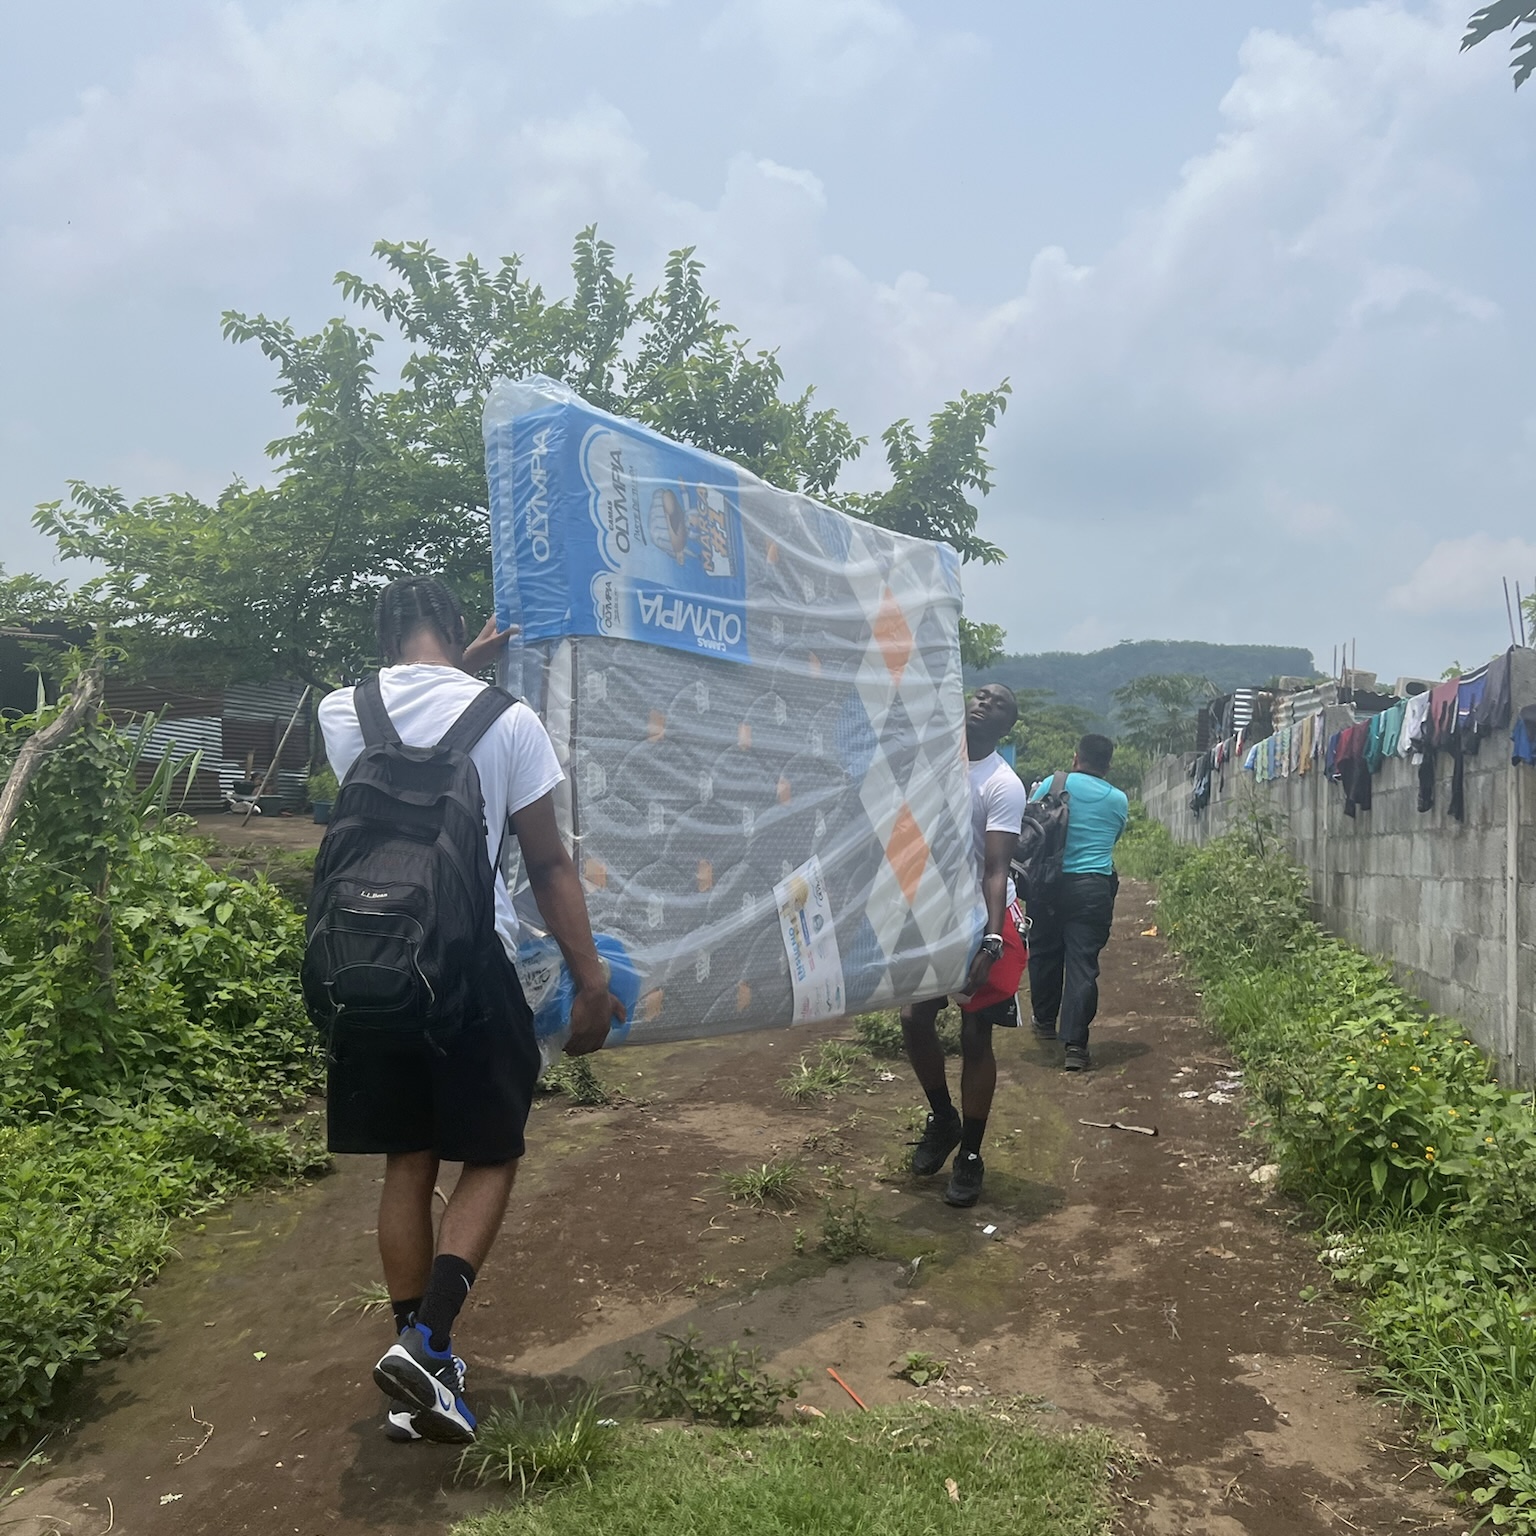 Students carrying a mattress on their service learning trip in Guatemala